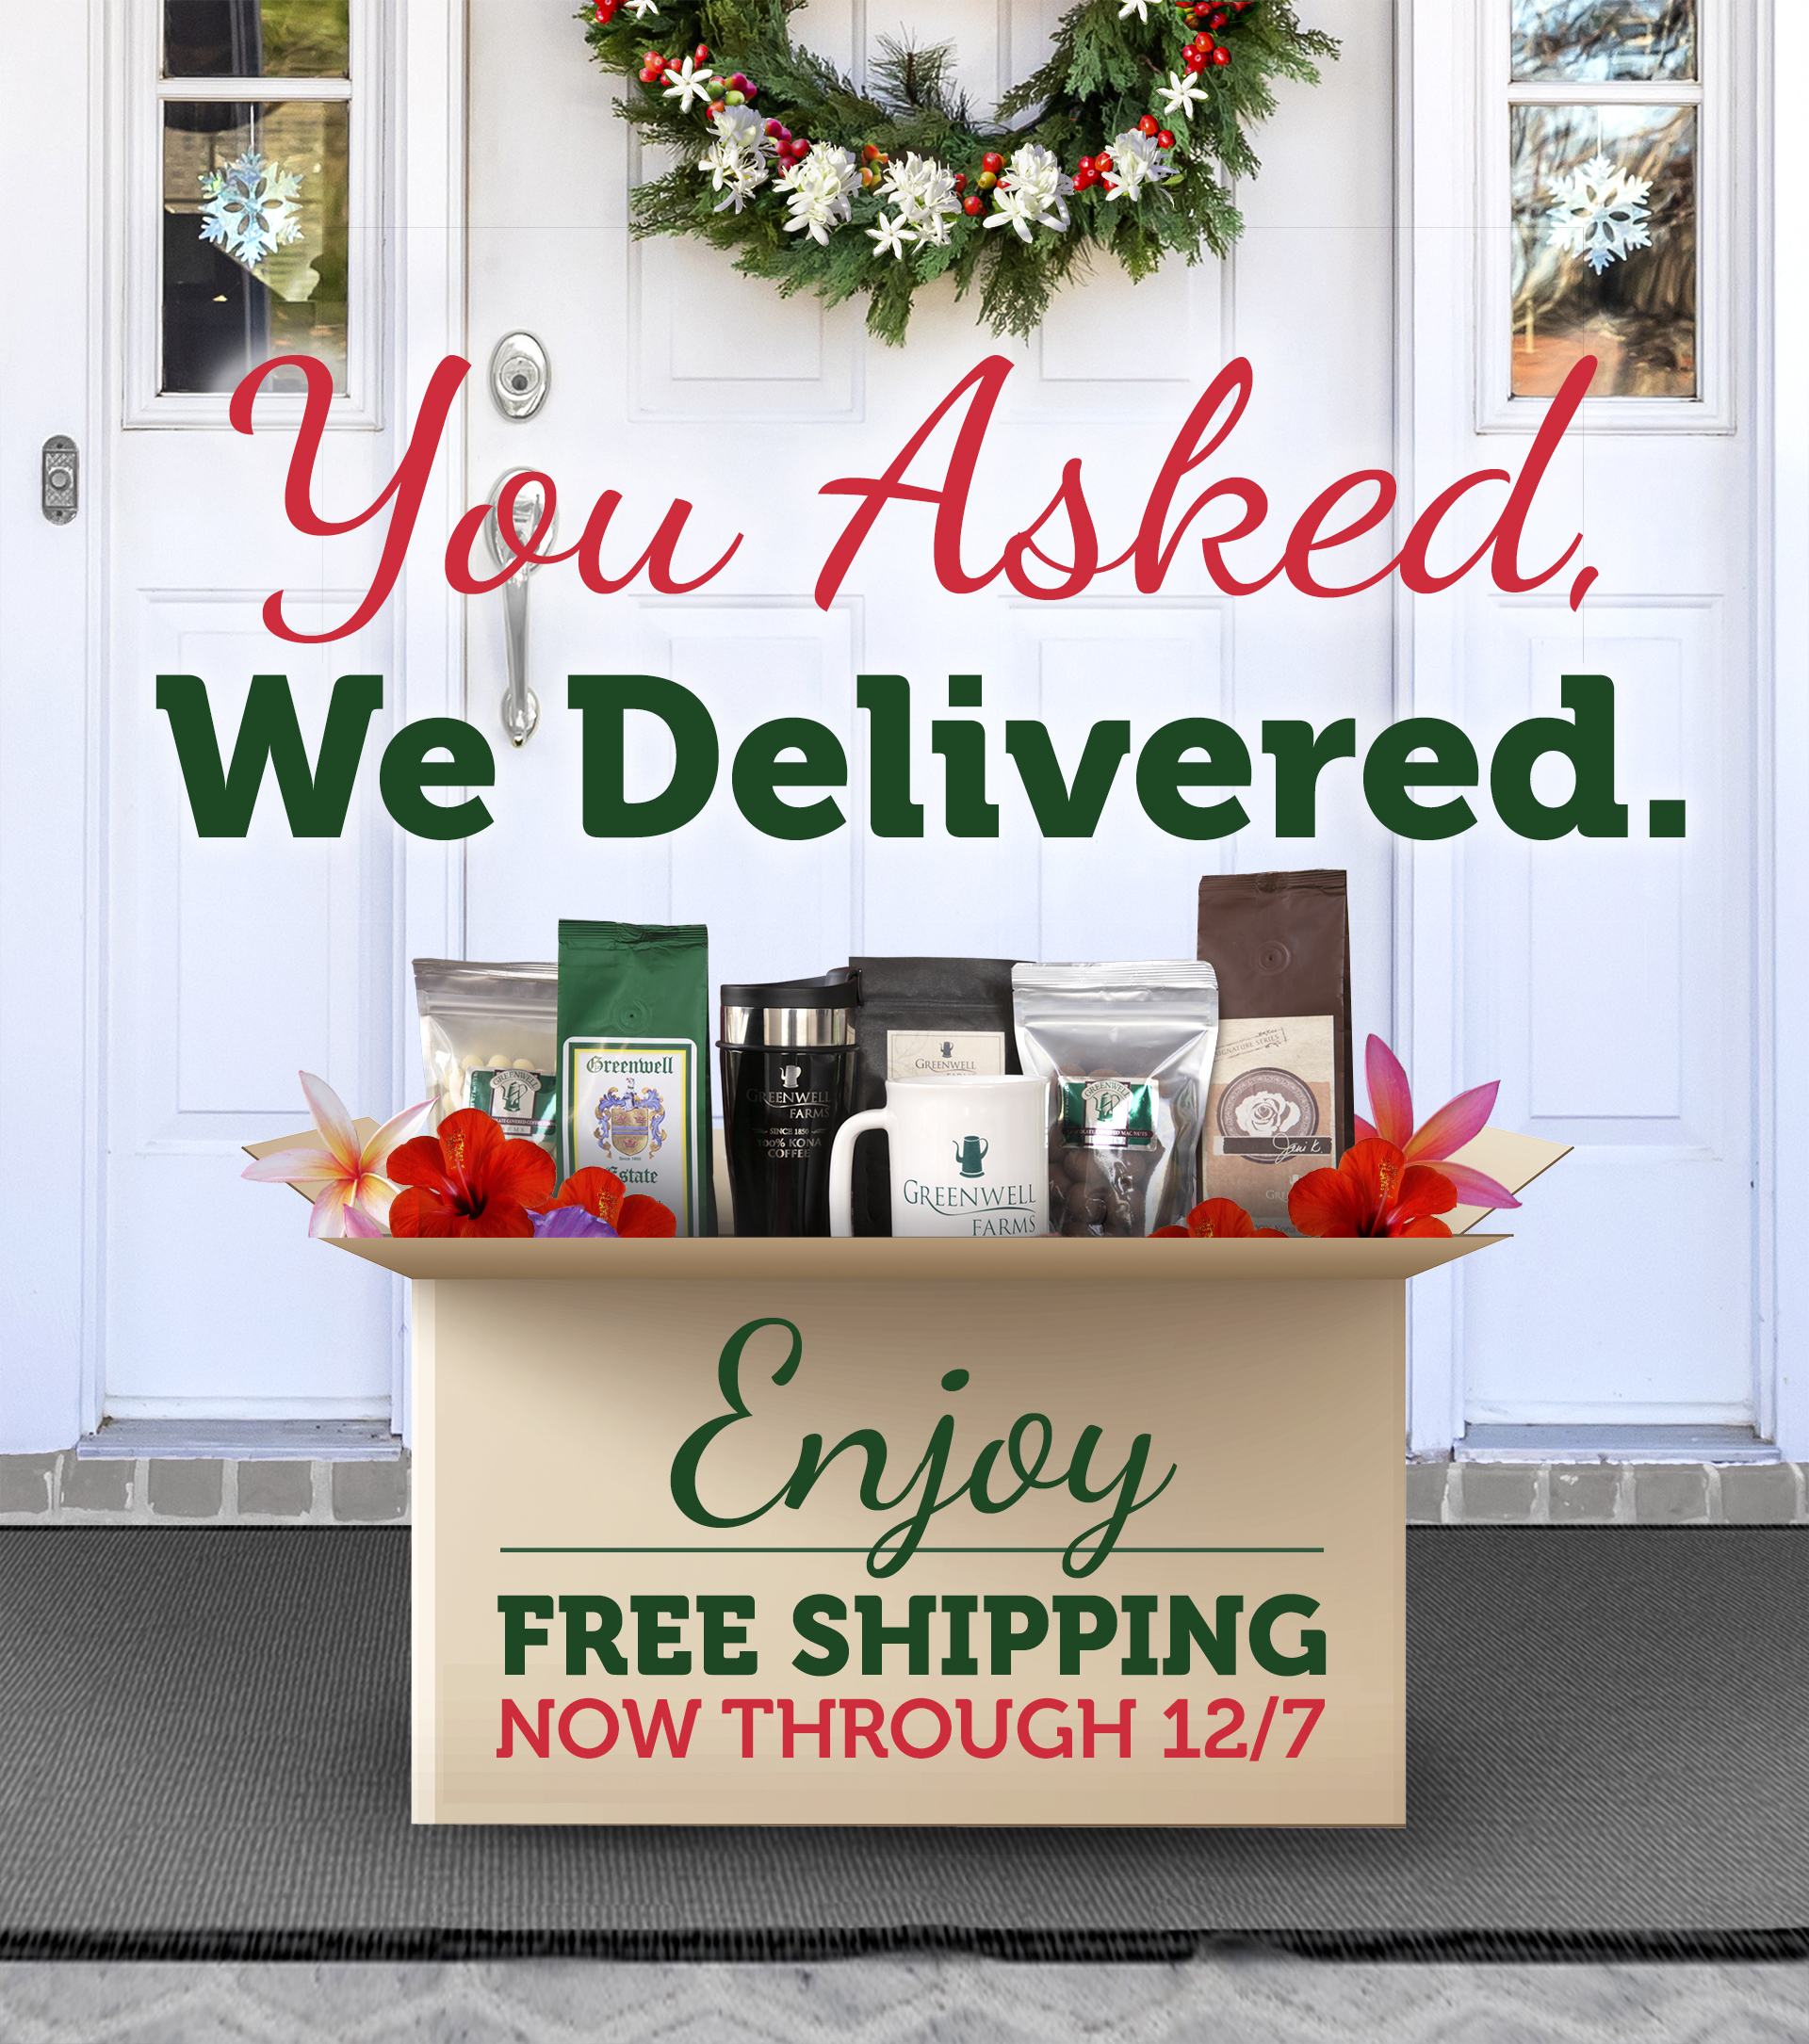 You Asked, We Delivered. Enjoy Free Shipping Now Through 12/7